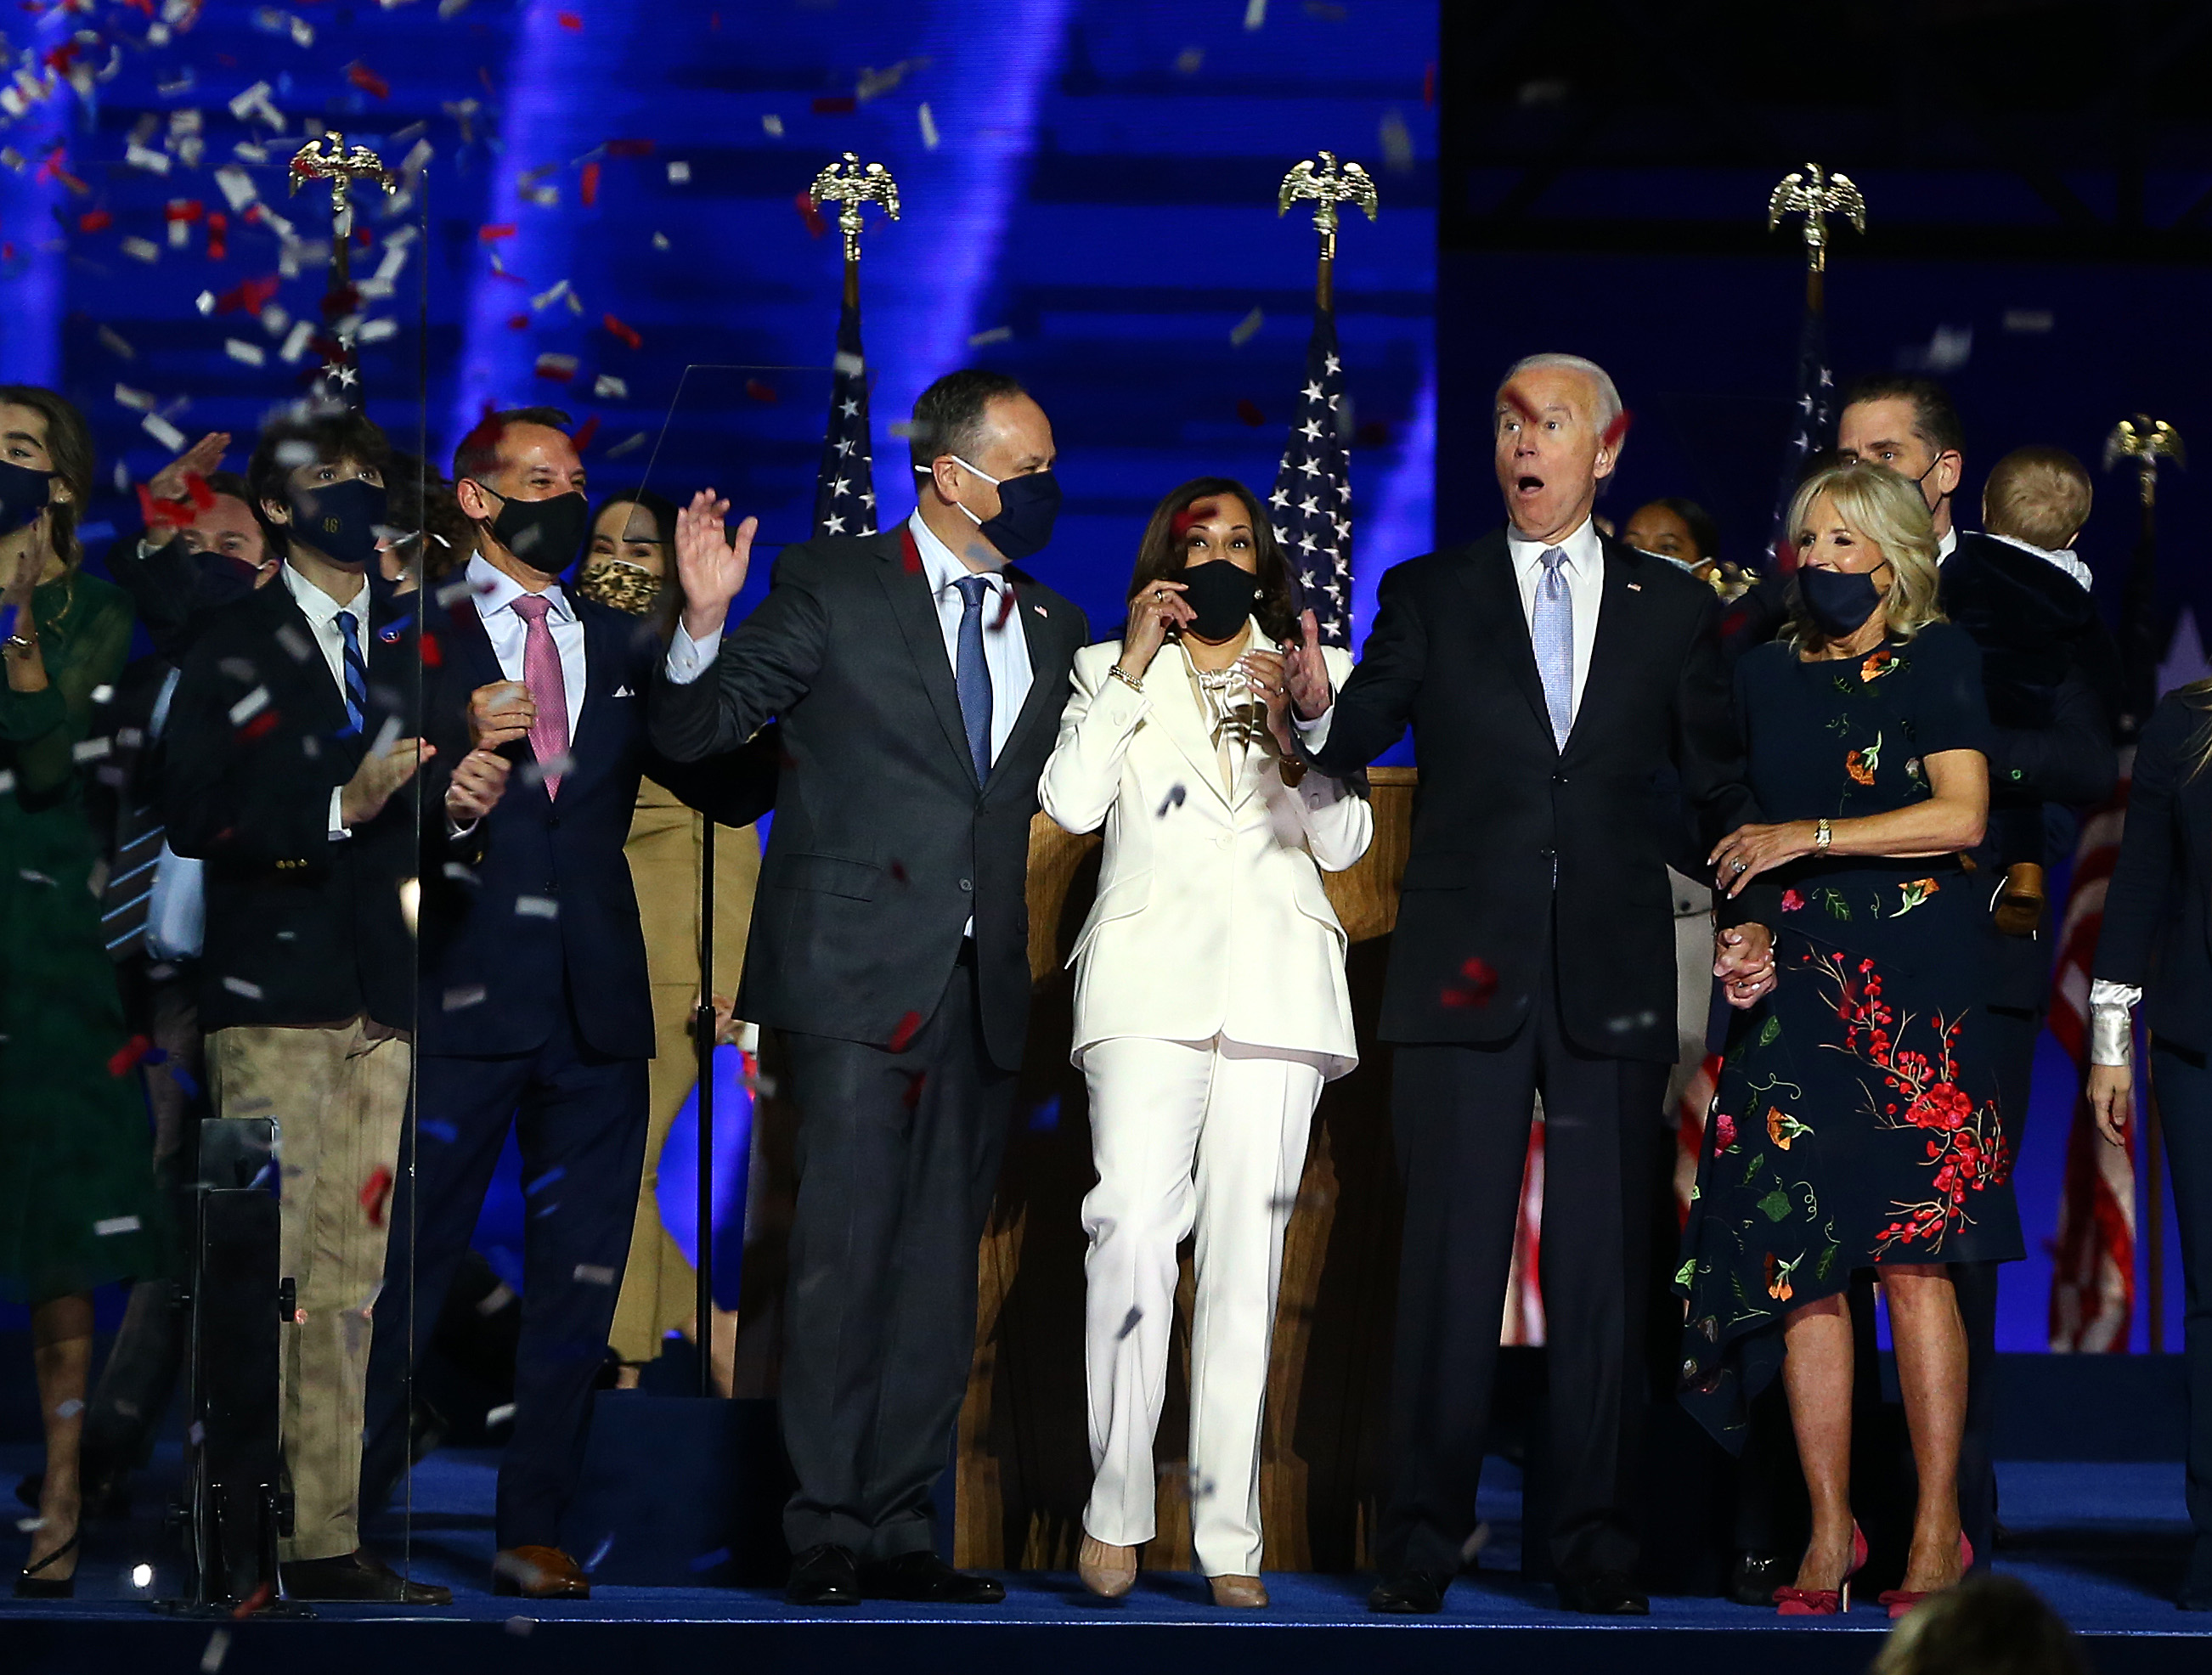 Download Here Are The Songs Joe Biden And Kamala Harris Played At Their Delaware Event The Boston Globe